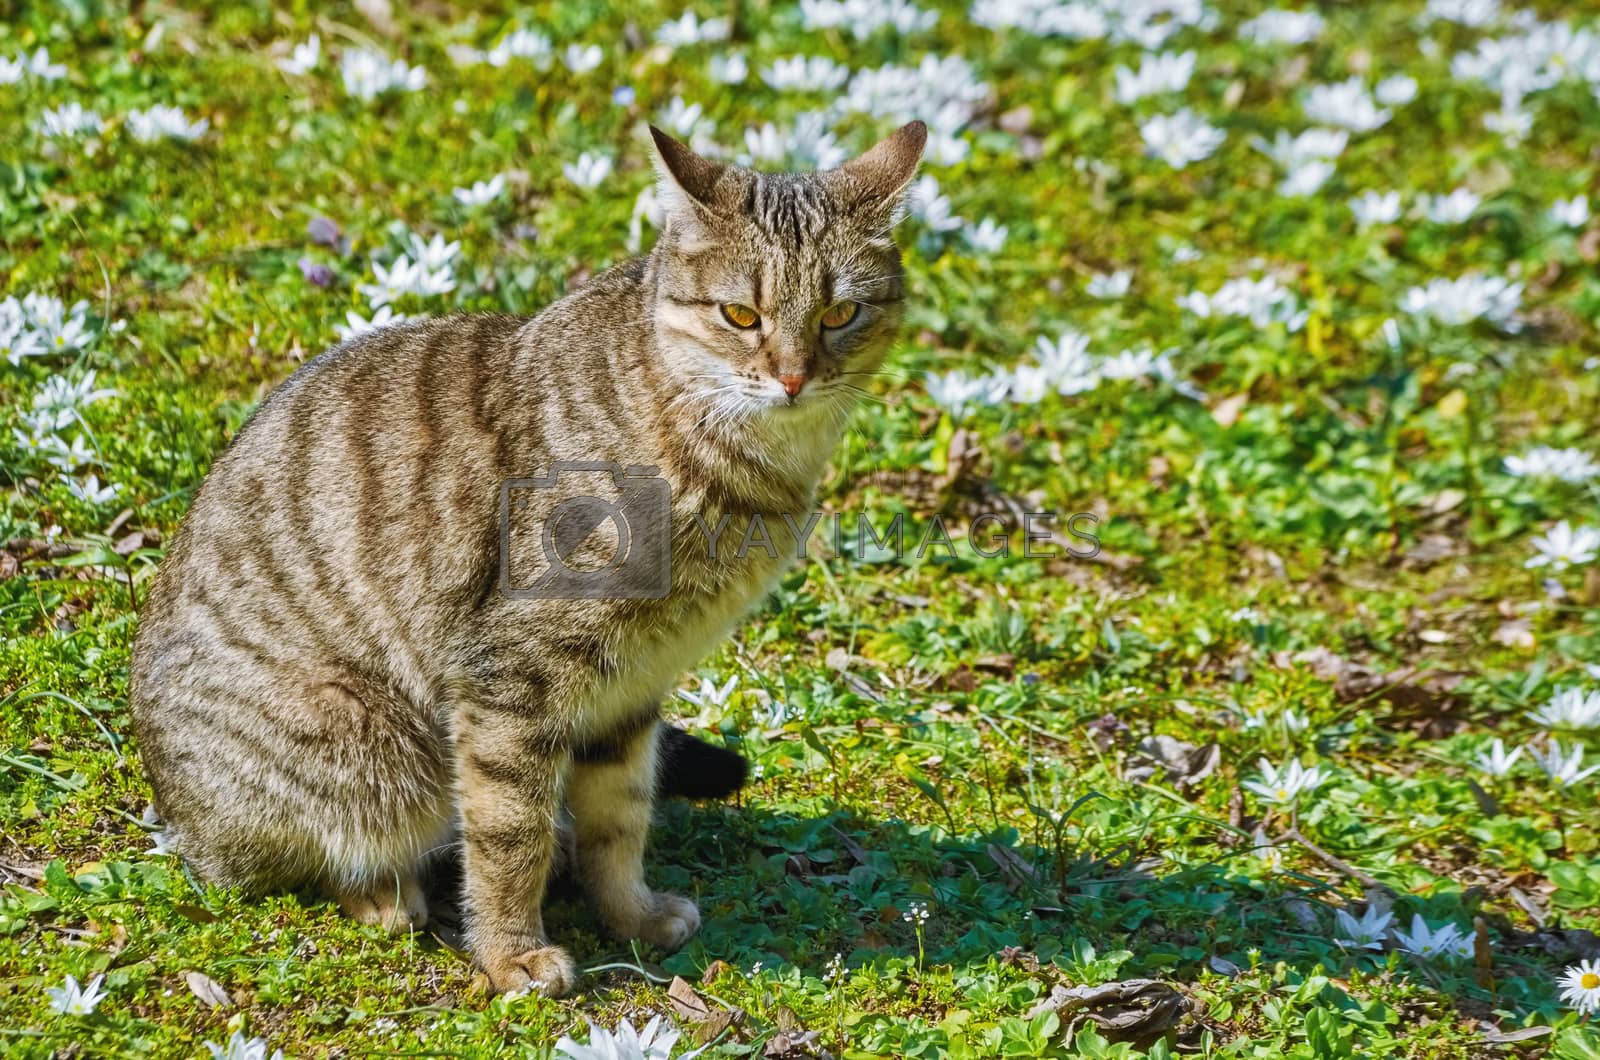 Royalty free image of Cat on the Lawn by SNR